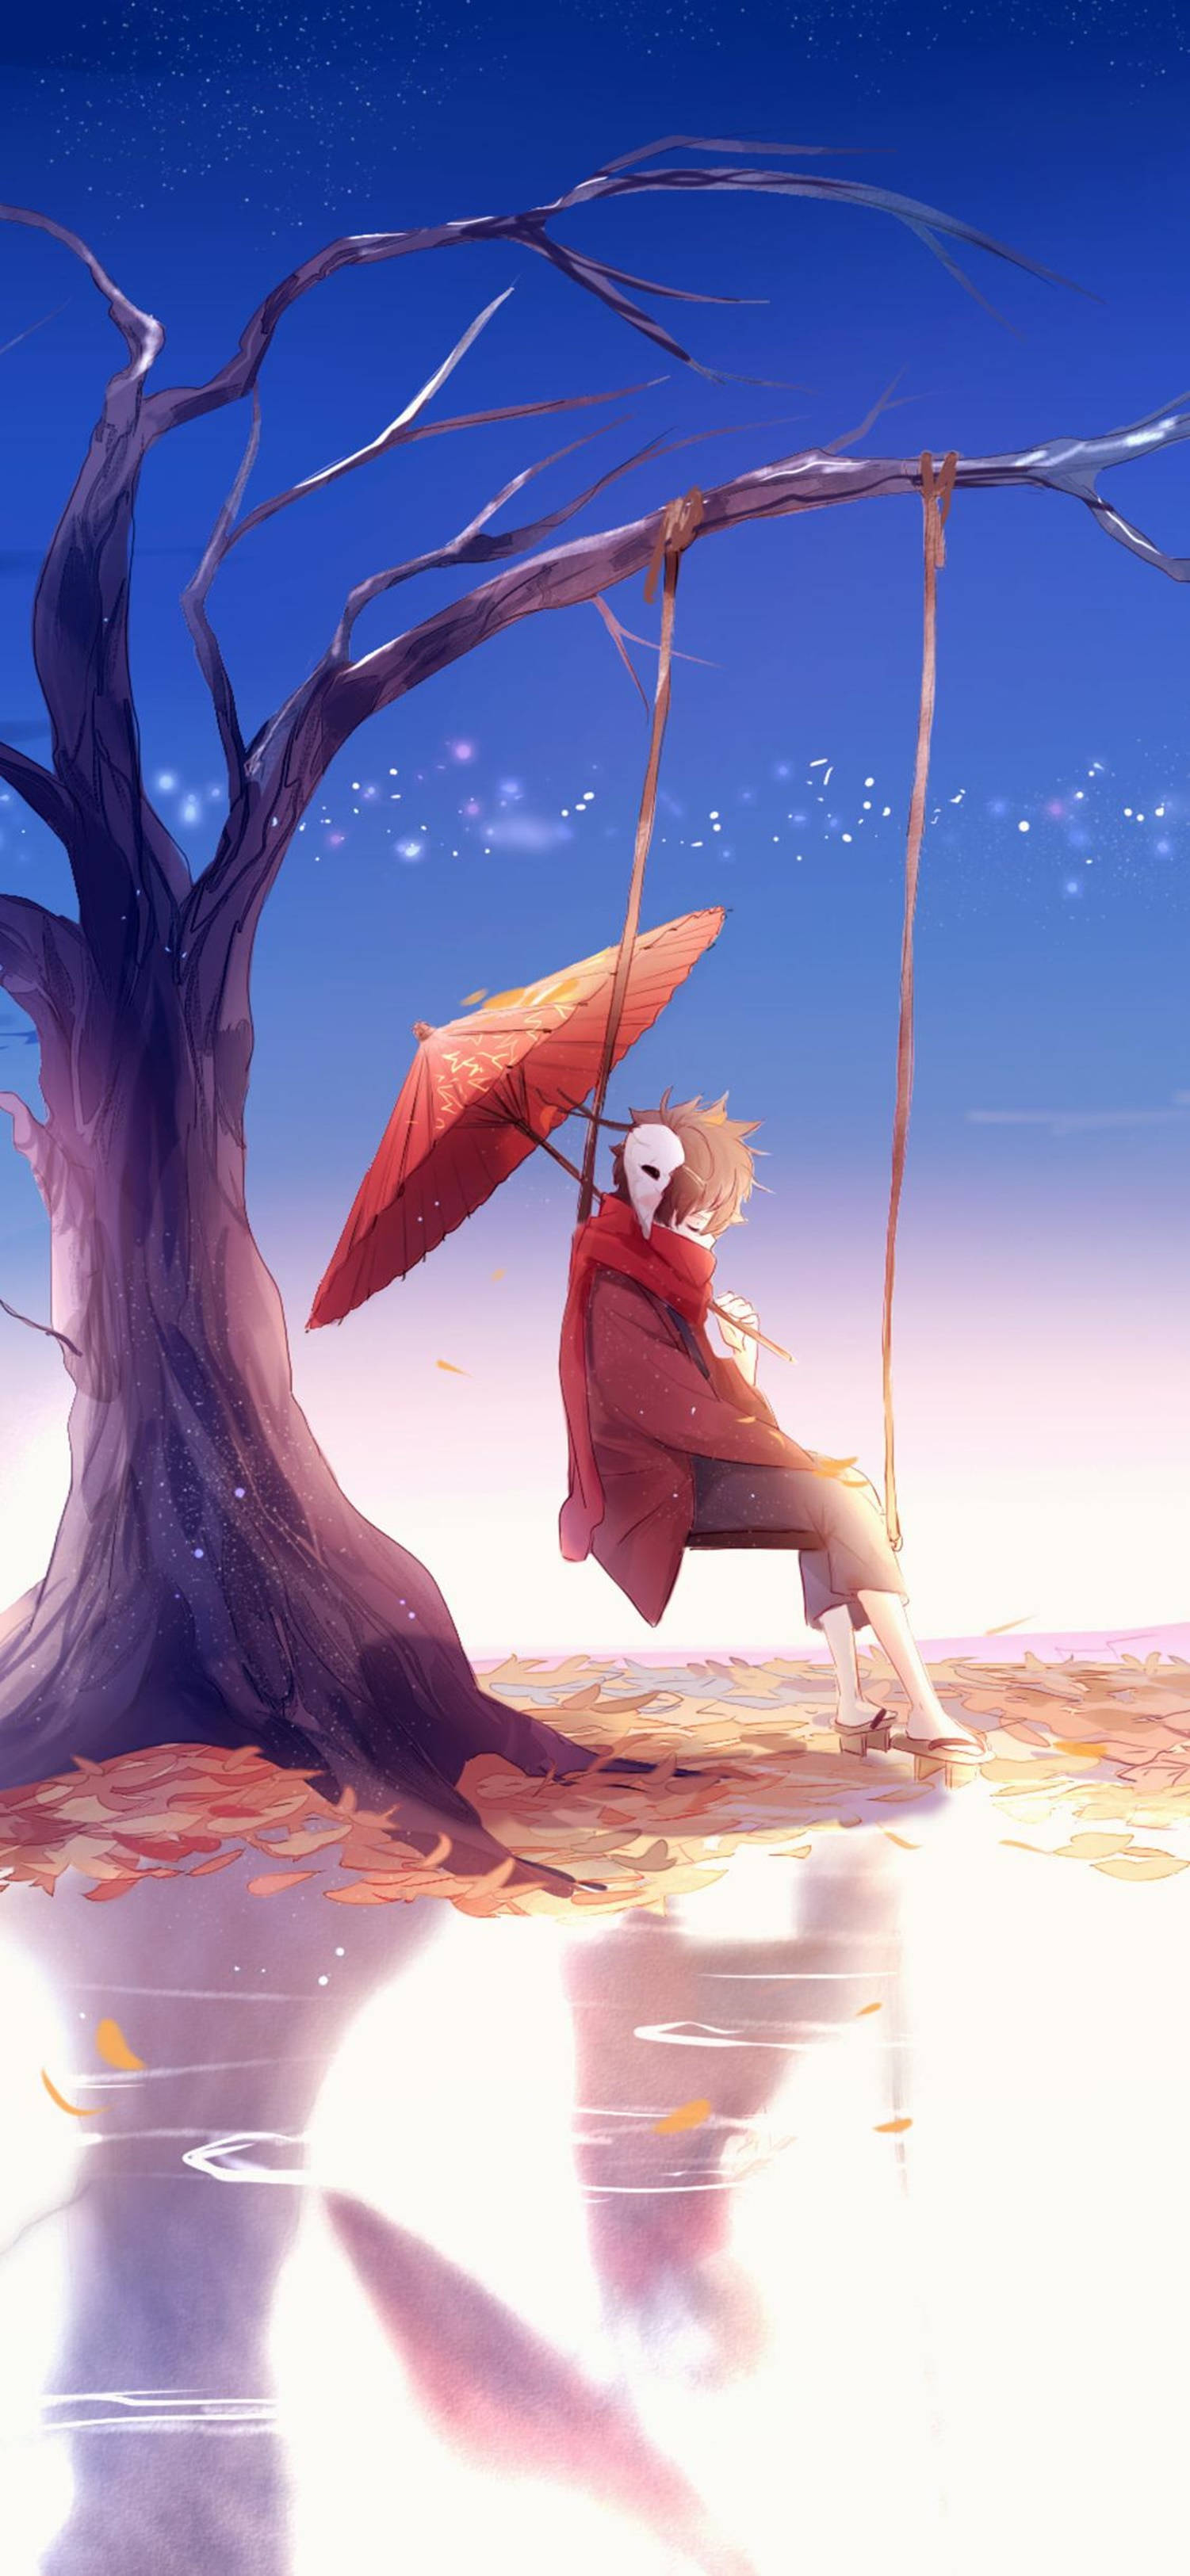 Best Anime Wallpapers by Hung Nguyen